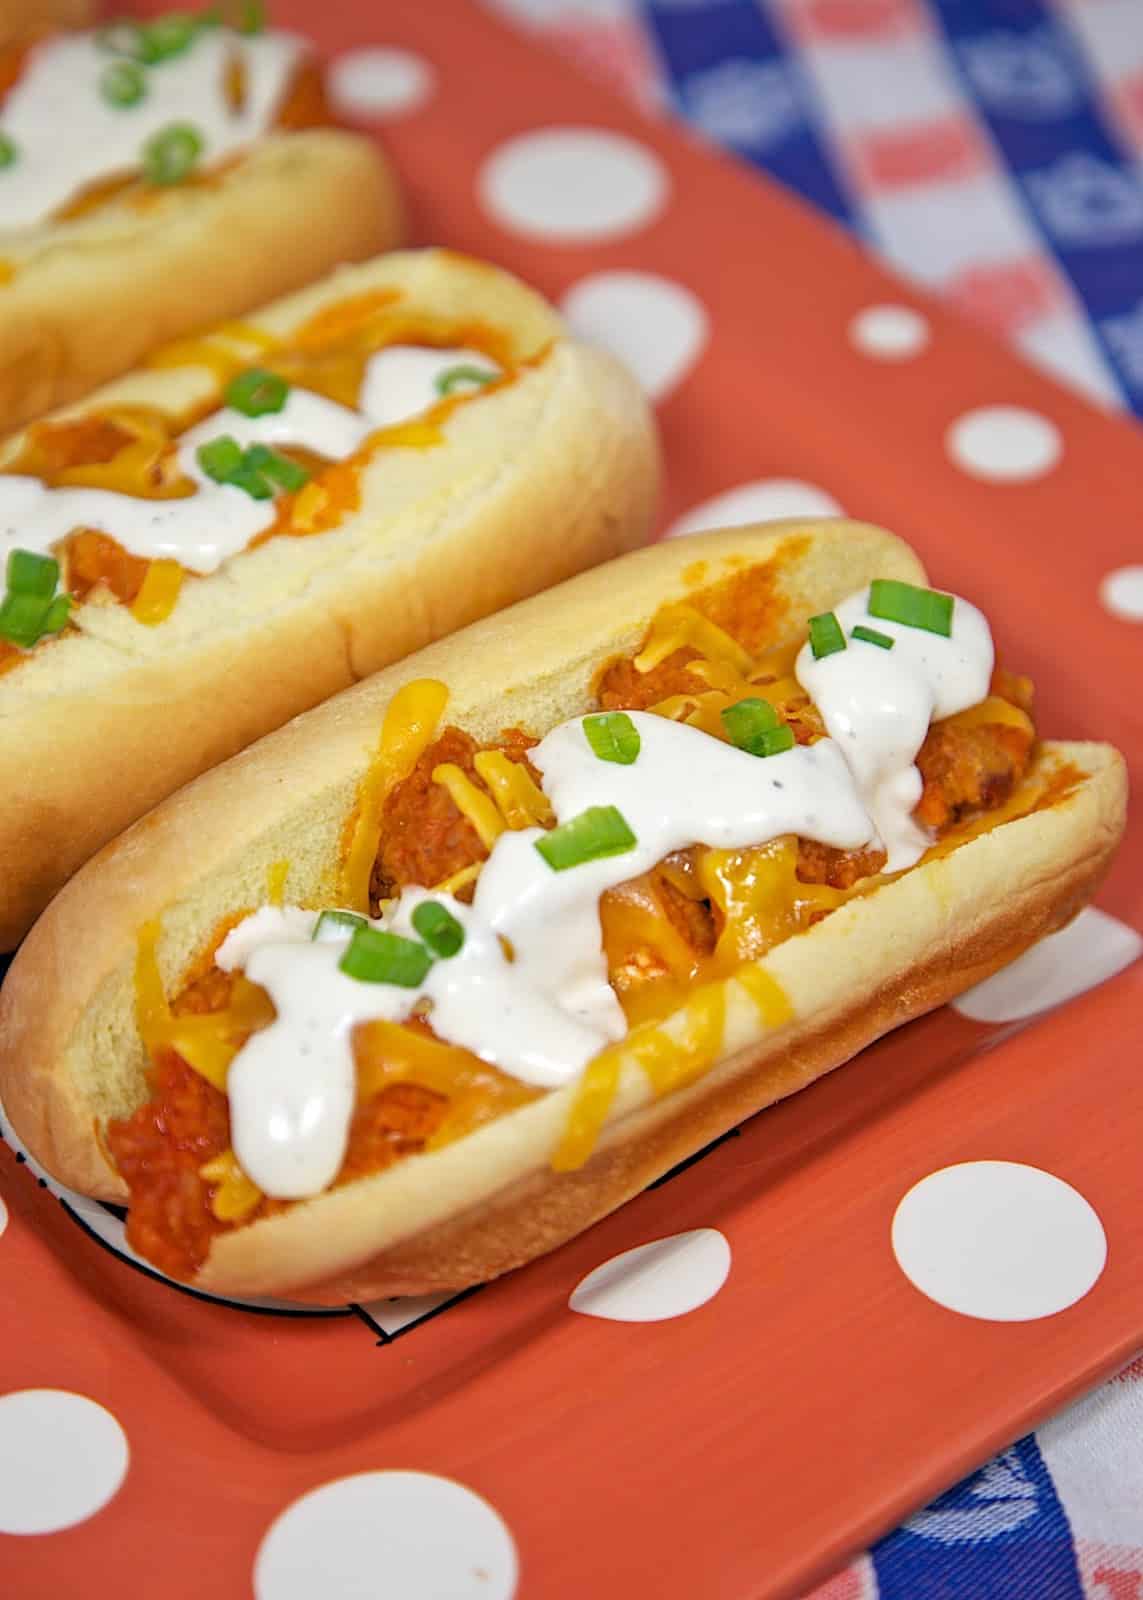 Buffalo Chicken Bird Dogs Recipe - chicken tenders, buffalo sauce, cheese and Ranch served in hot dog buns. Our favorite way to eat chicken tenders!